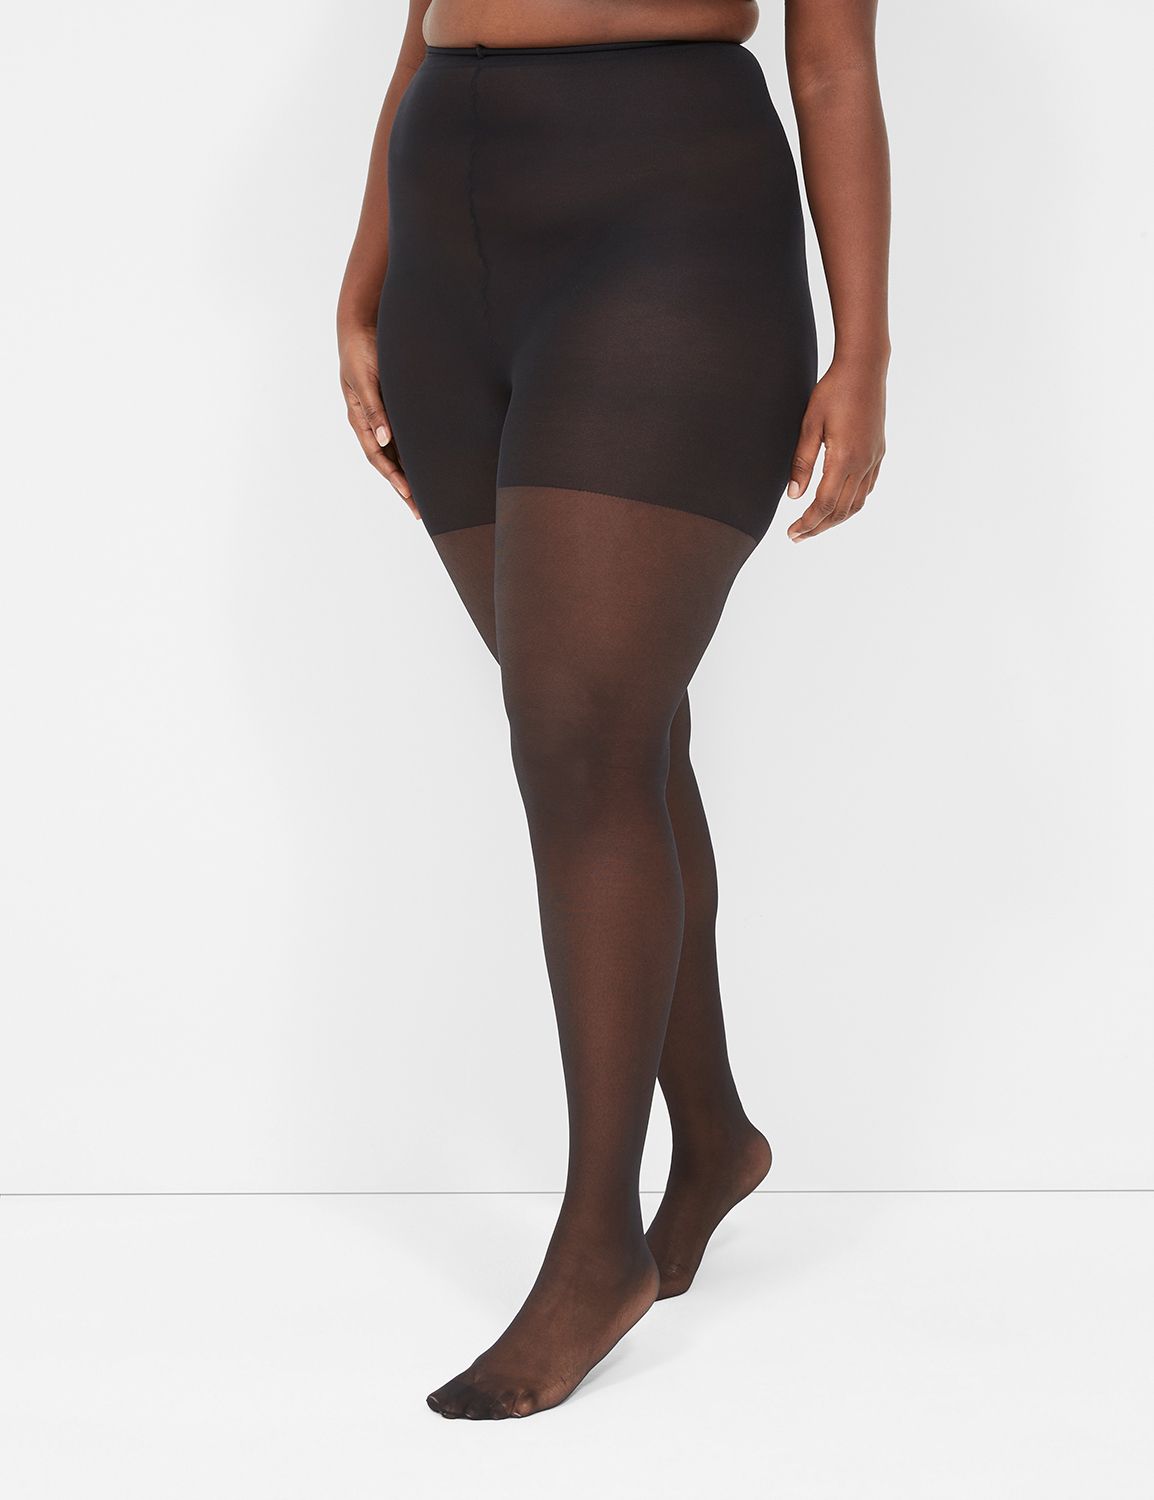 The Best Plus Size Tights That Are So Flattering: Starting at Just $10